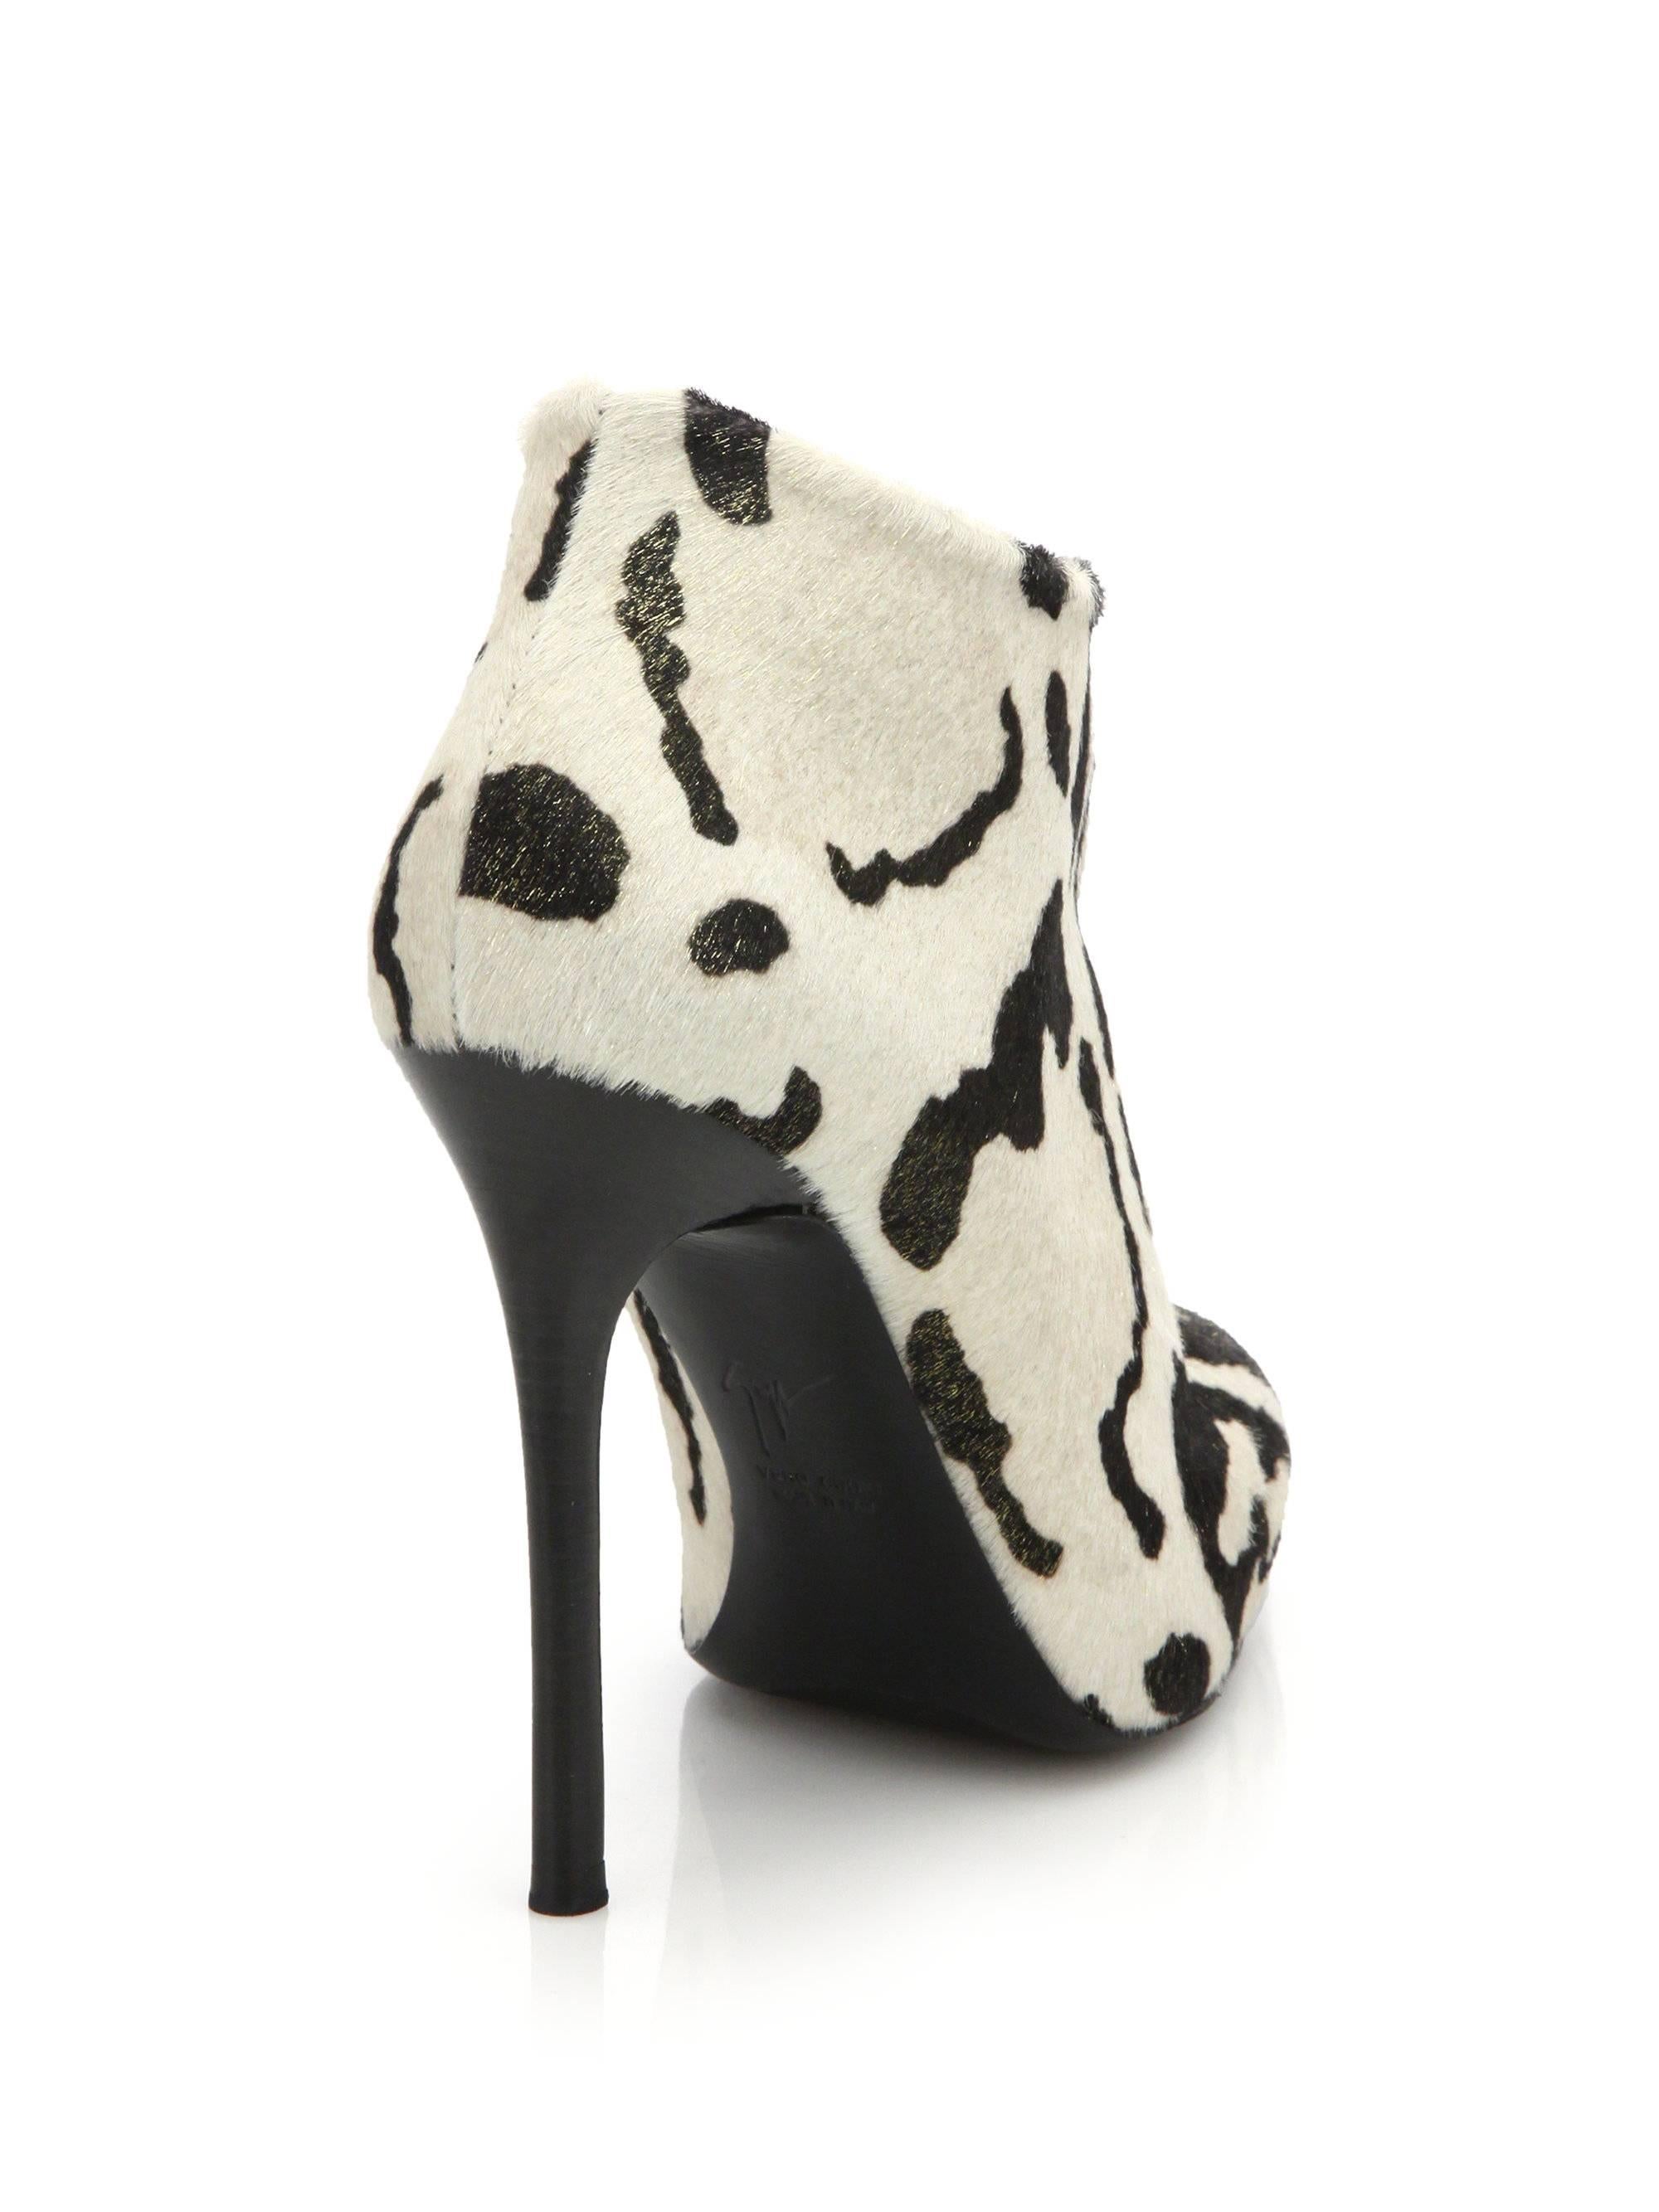 Beige Giuseppe Zanotti NEW & SOLD OUT Animal Print Fur Ankle Boots Booties in Box